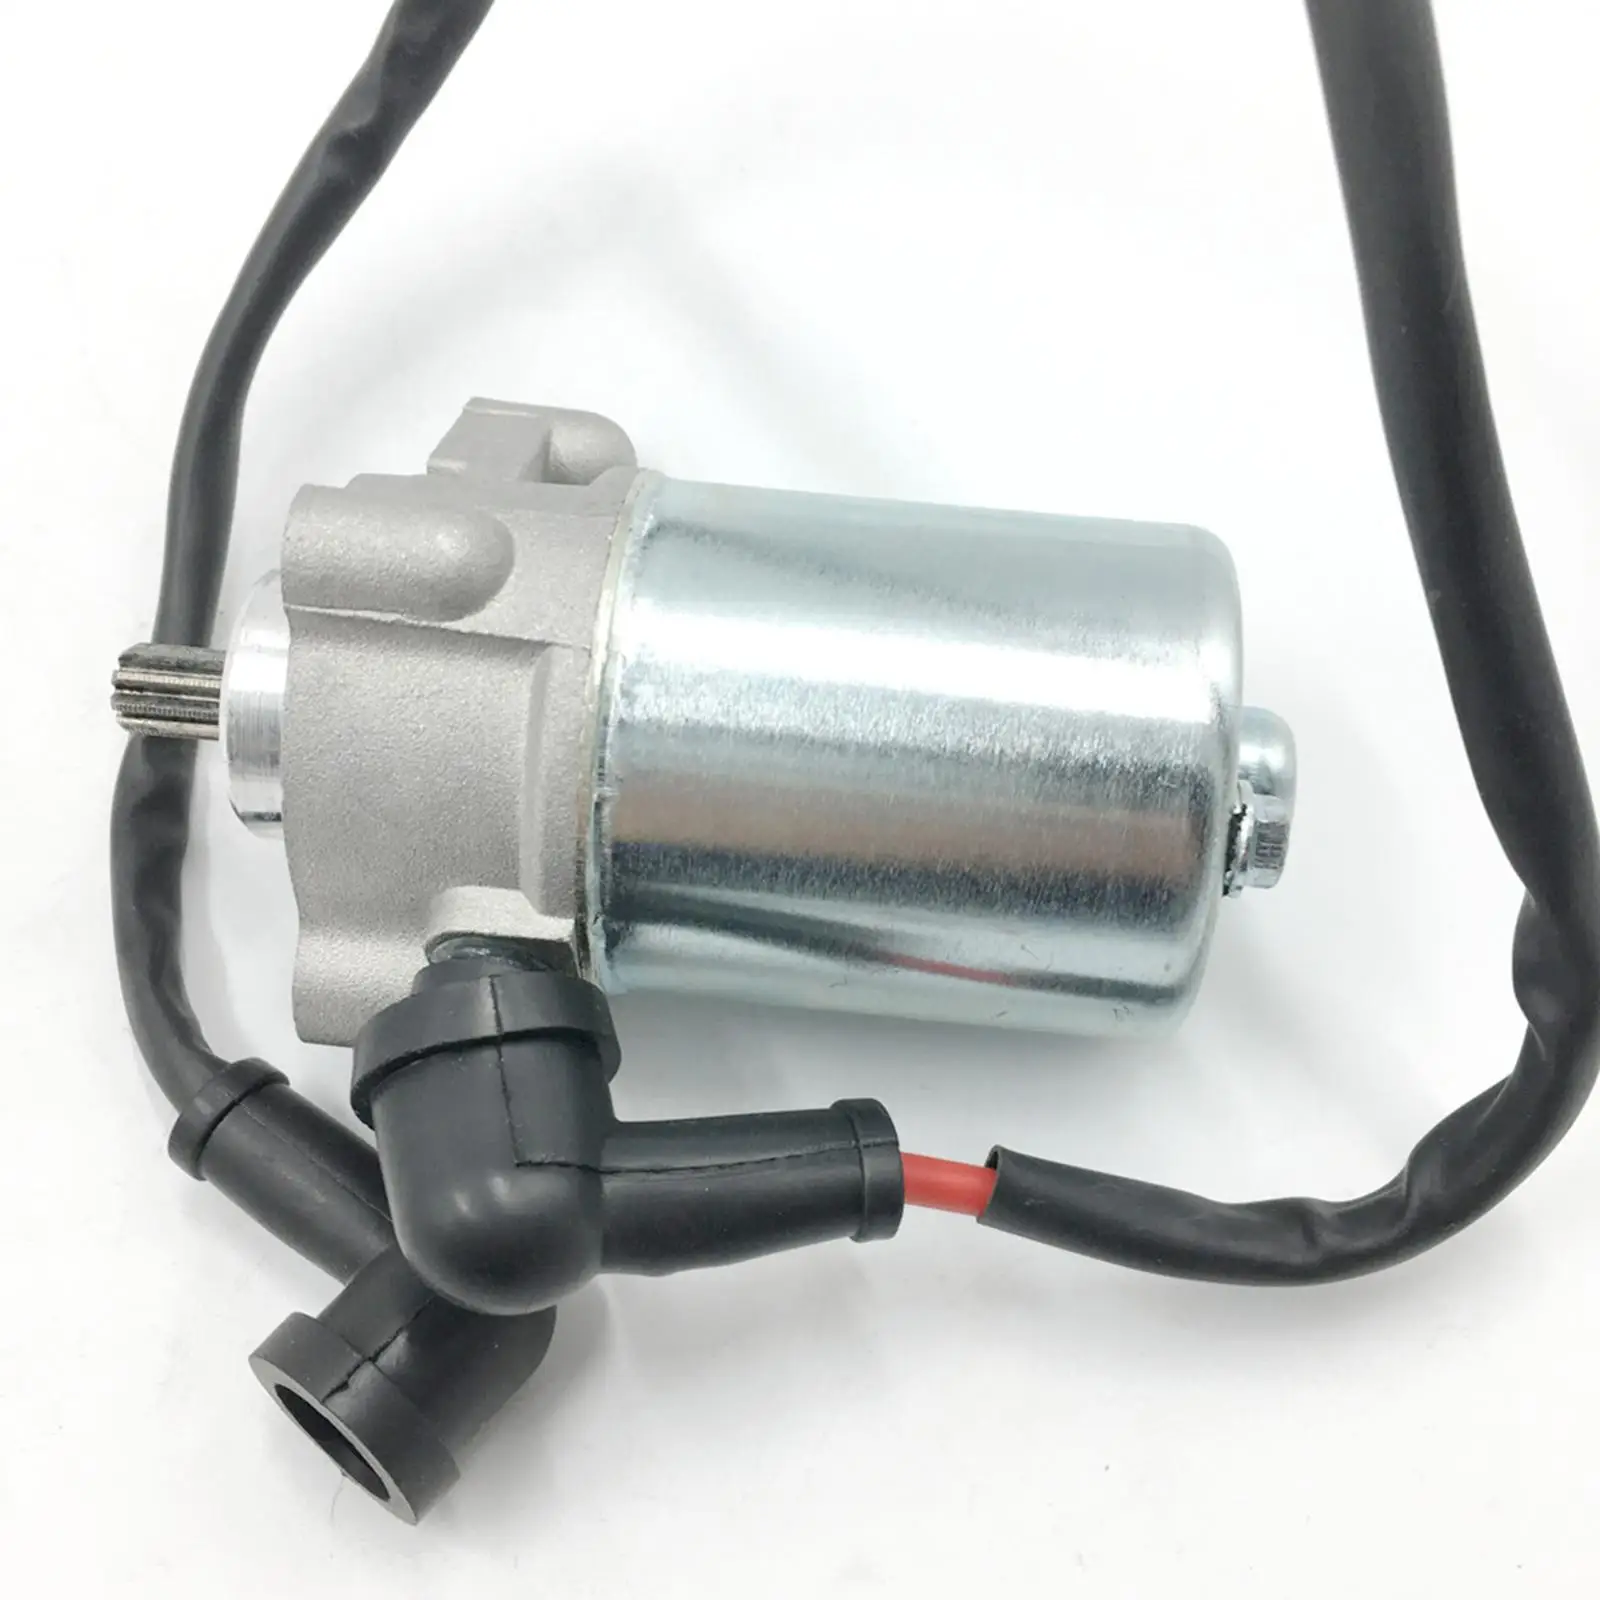 Starter Motor Durable Replacement for Yamaha Tdr125 DT125x DT125R